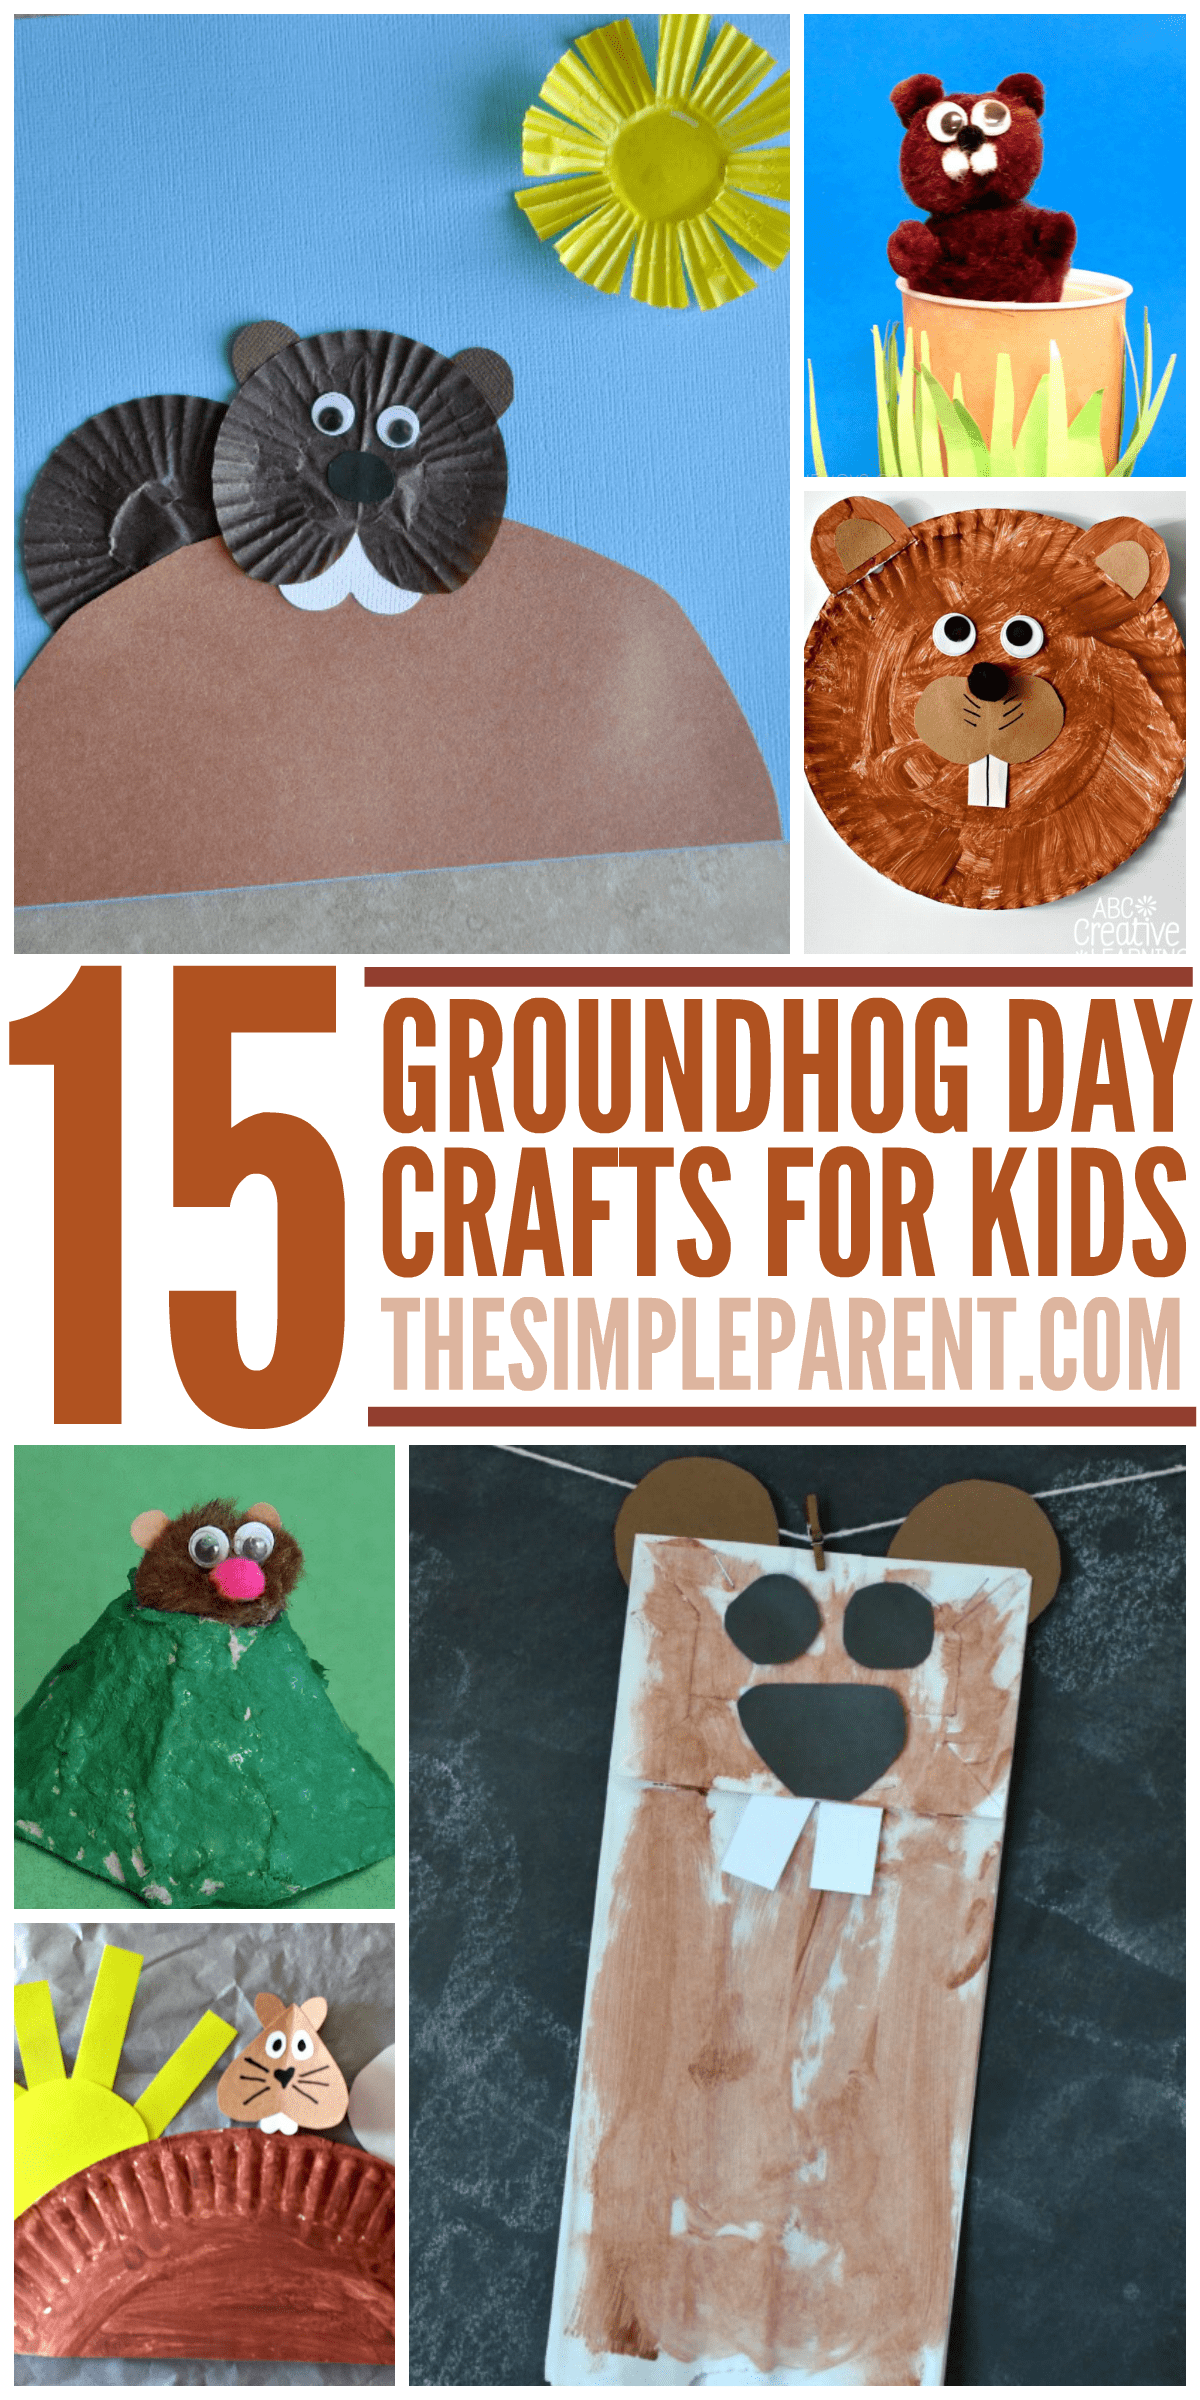 Will he see his shadow or not? It doesn't matter with these fun Groundhog Day crafts to do with the kids!